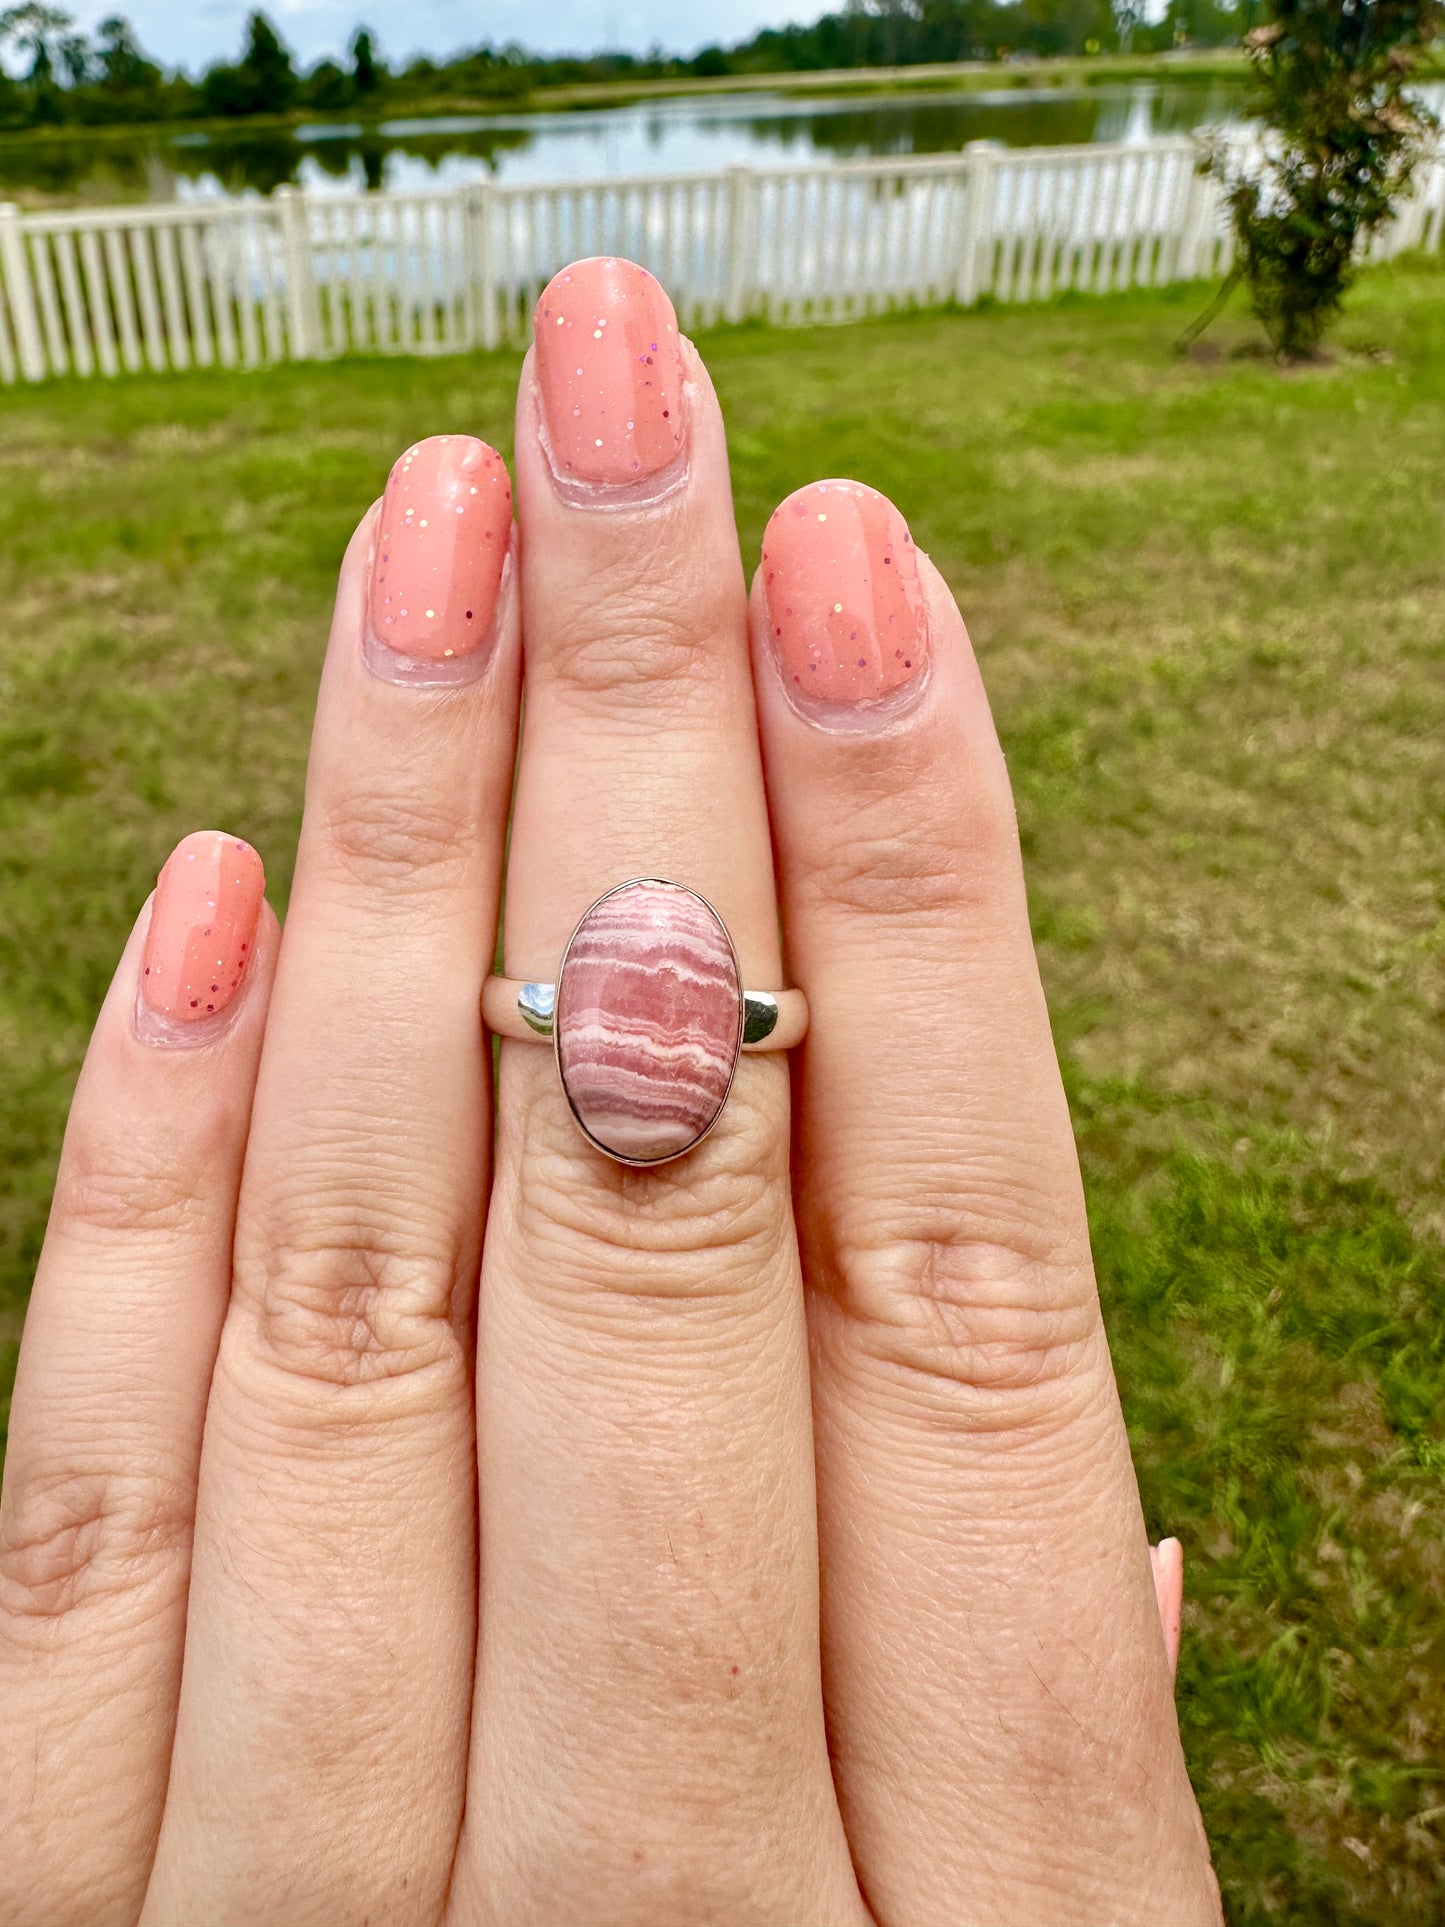 Beautiful Rhodochrosite Sterling Silver Ring Size 8.25 - Elegant Pink Gemstone, Artisan Crafted Jewelry, Perfect for Any Occasion